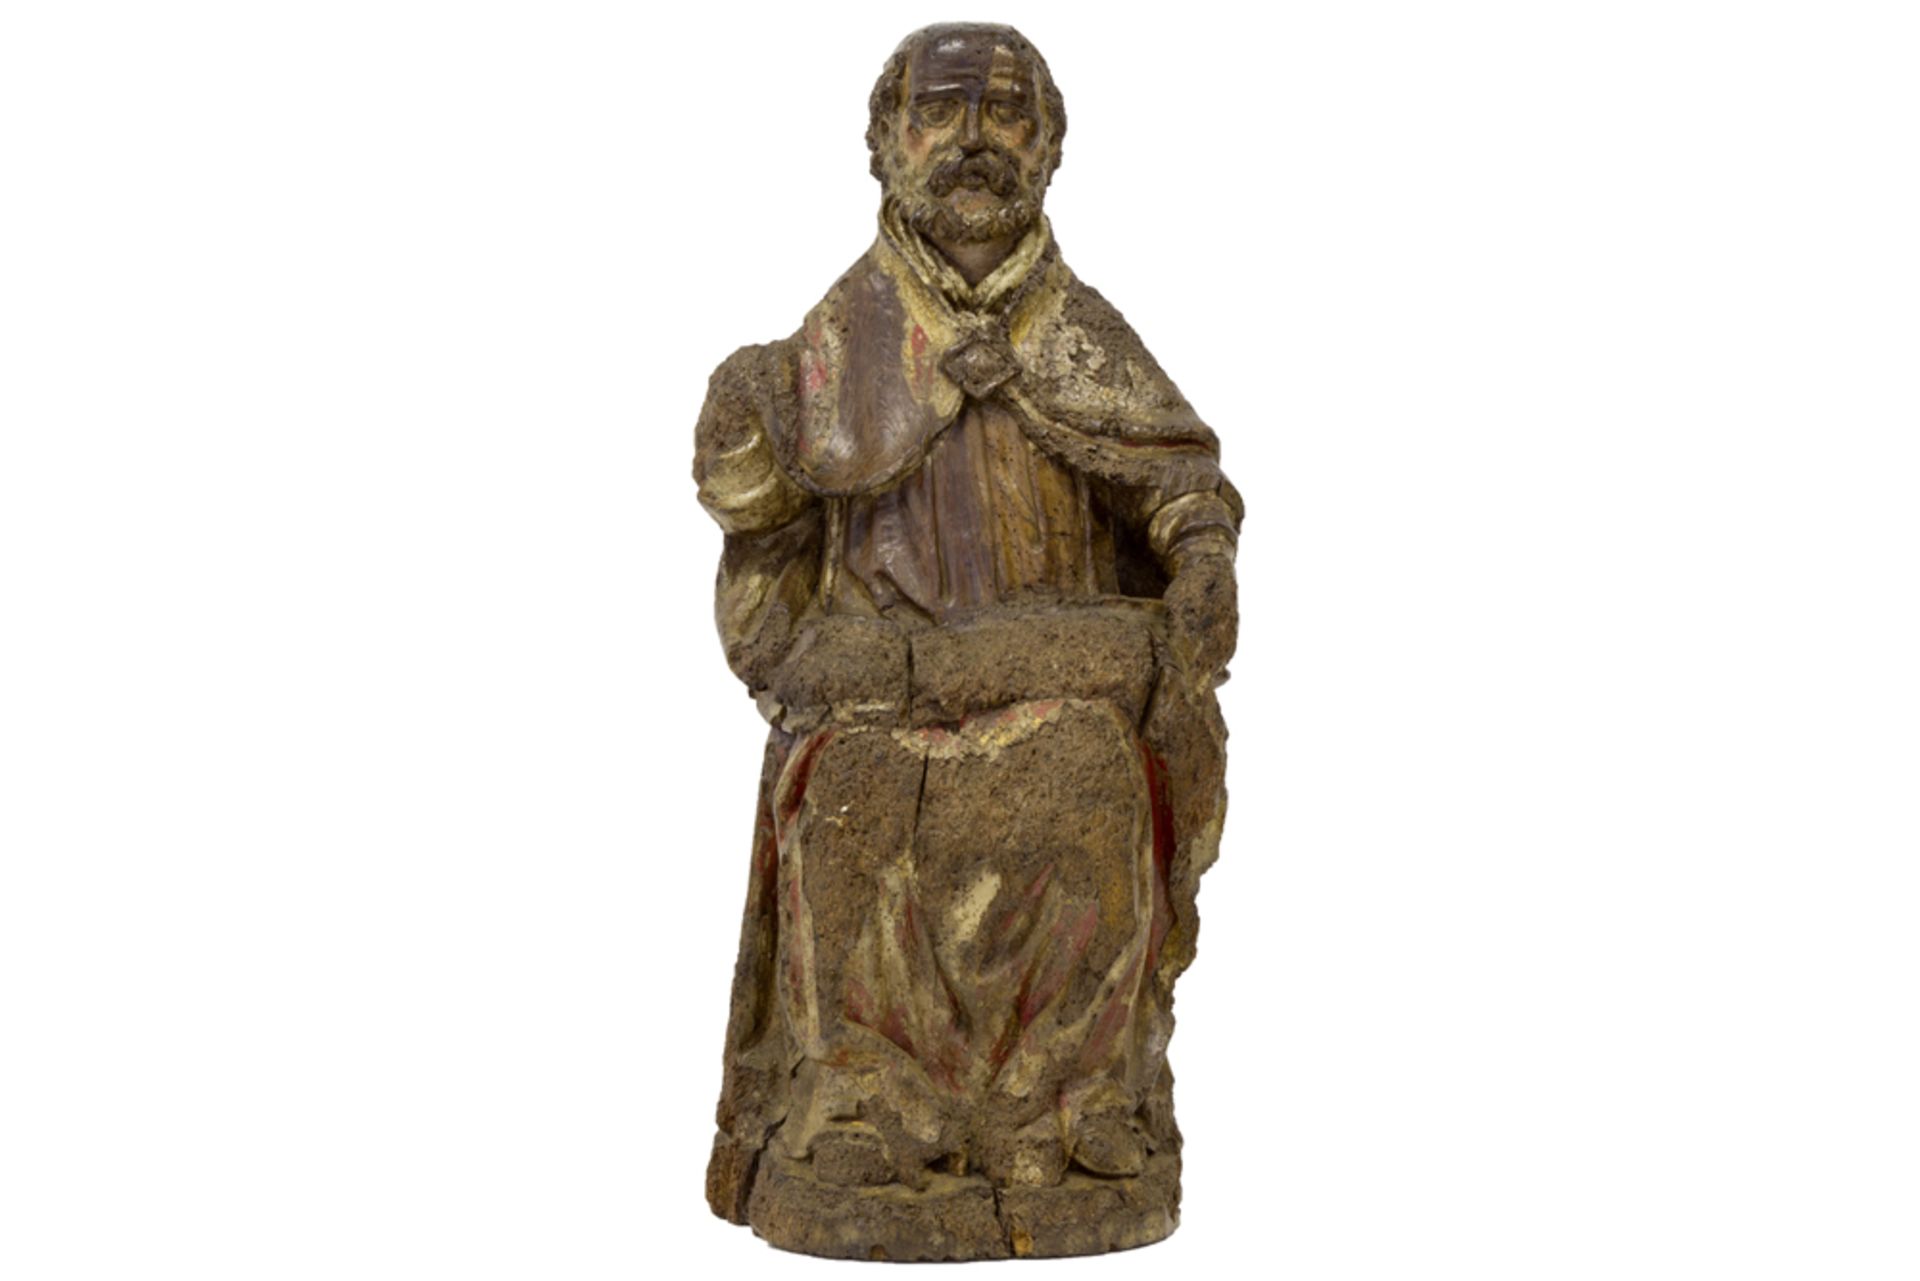 15th Cent. Flemish gothic style sculpture in wood with remains of the original polychromy: "